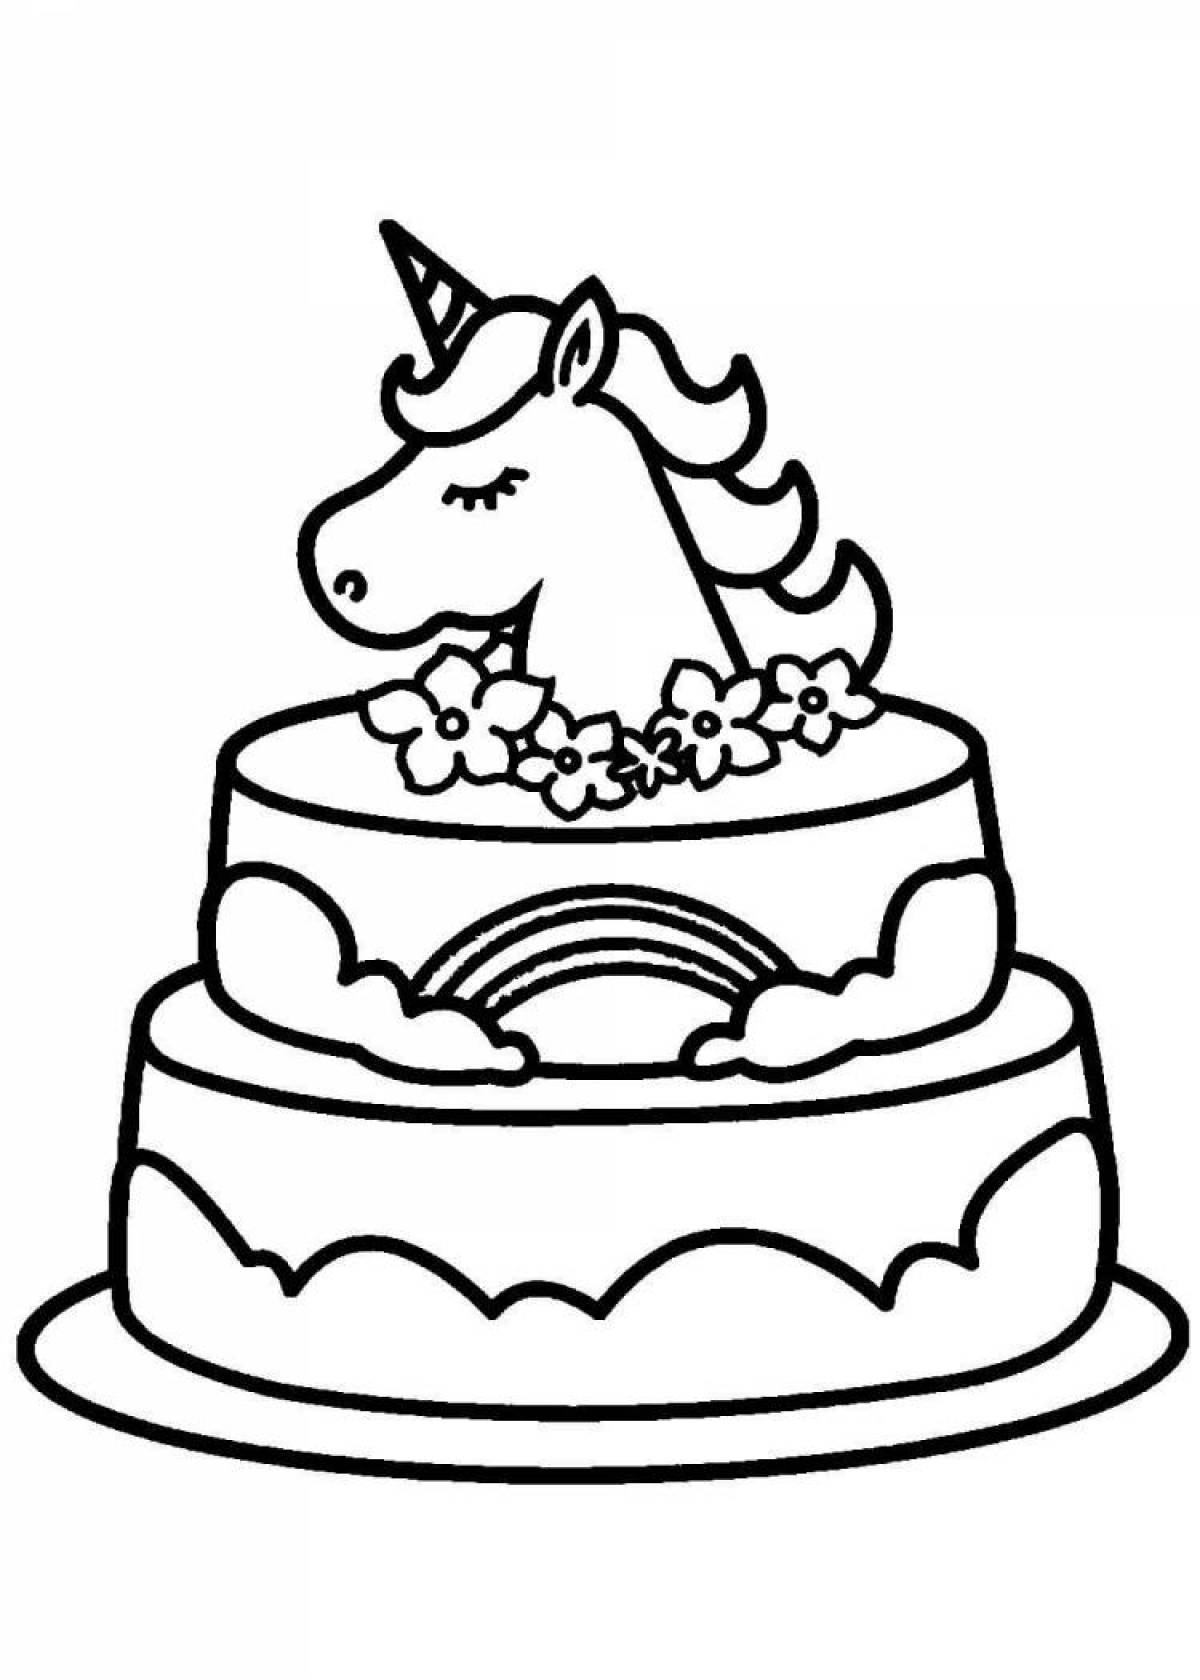 Color-joy cakes coloring pages for kids